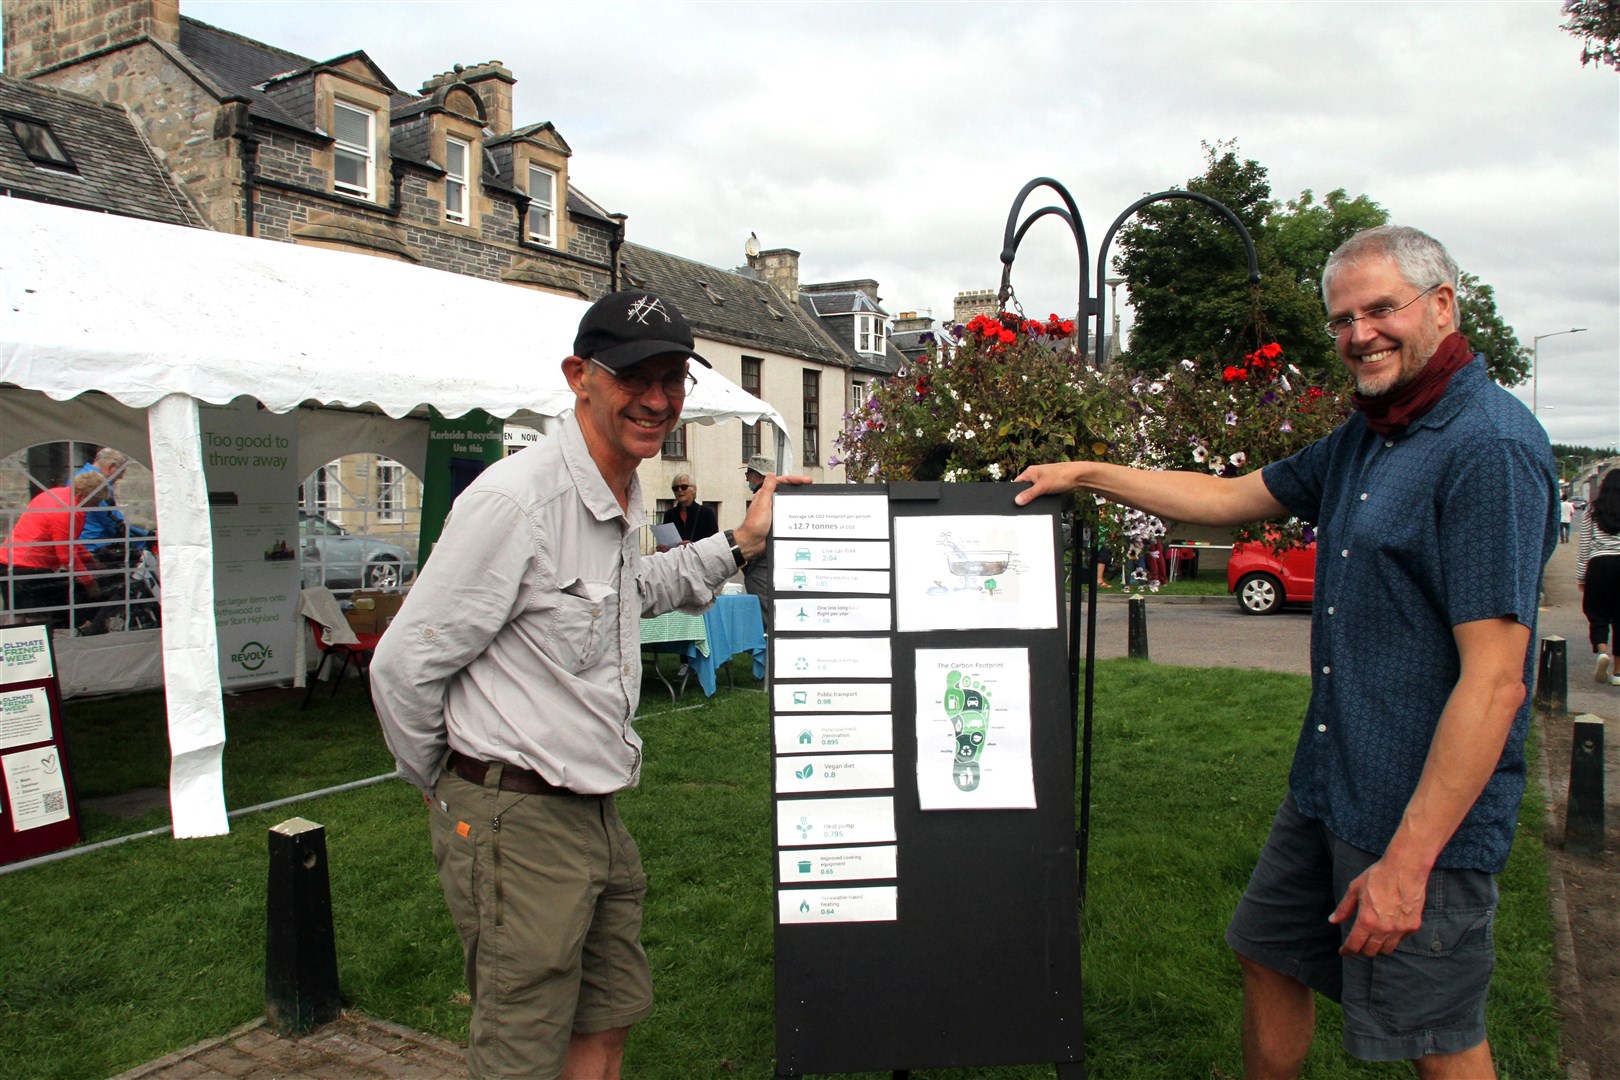 Peter Grant (left) and Jeremy Money discuss their carbon footprints.